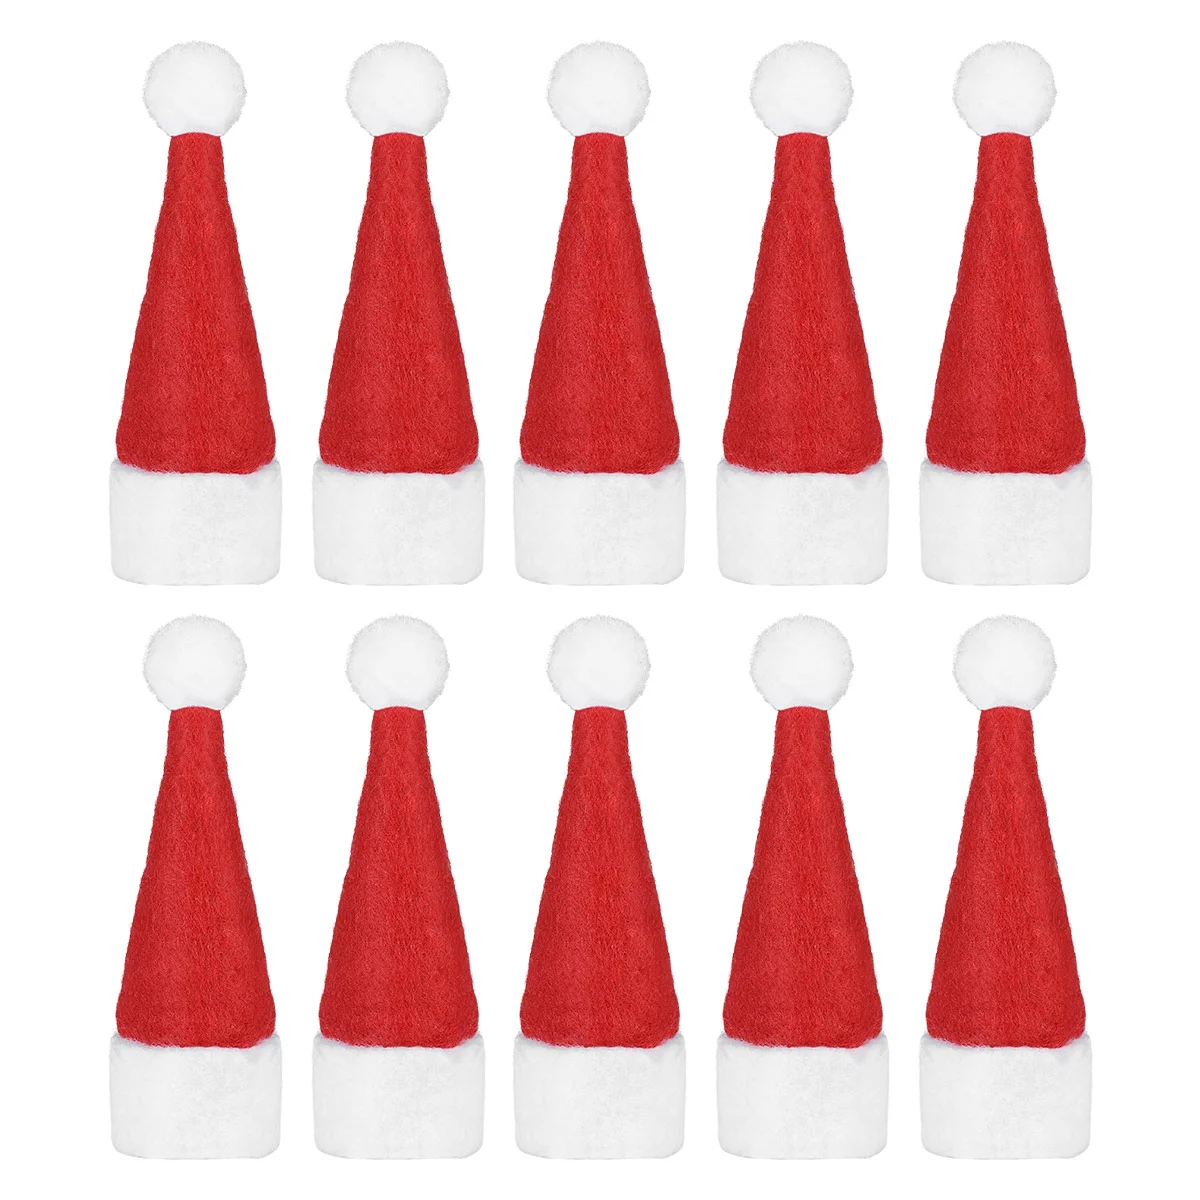 

Amosfun 24pcs Mini Christmas Caps Lollipop Hats Decors Nonwoven Candy Packing Hats Christmas Supplies for Home Shop Store